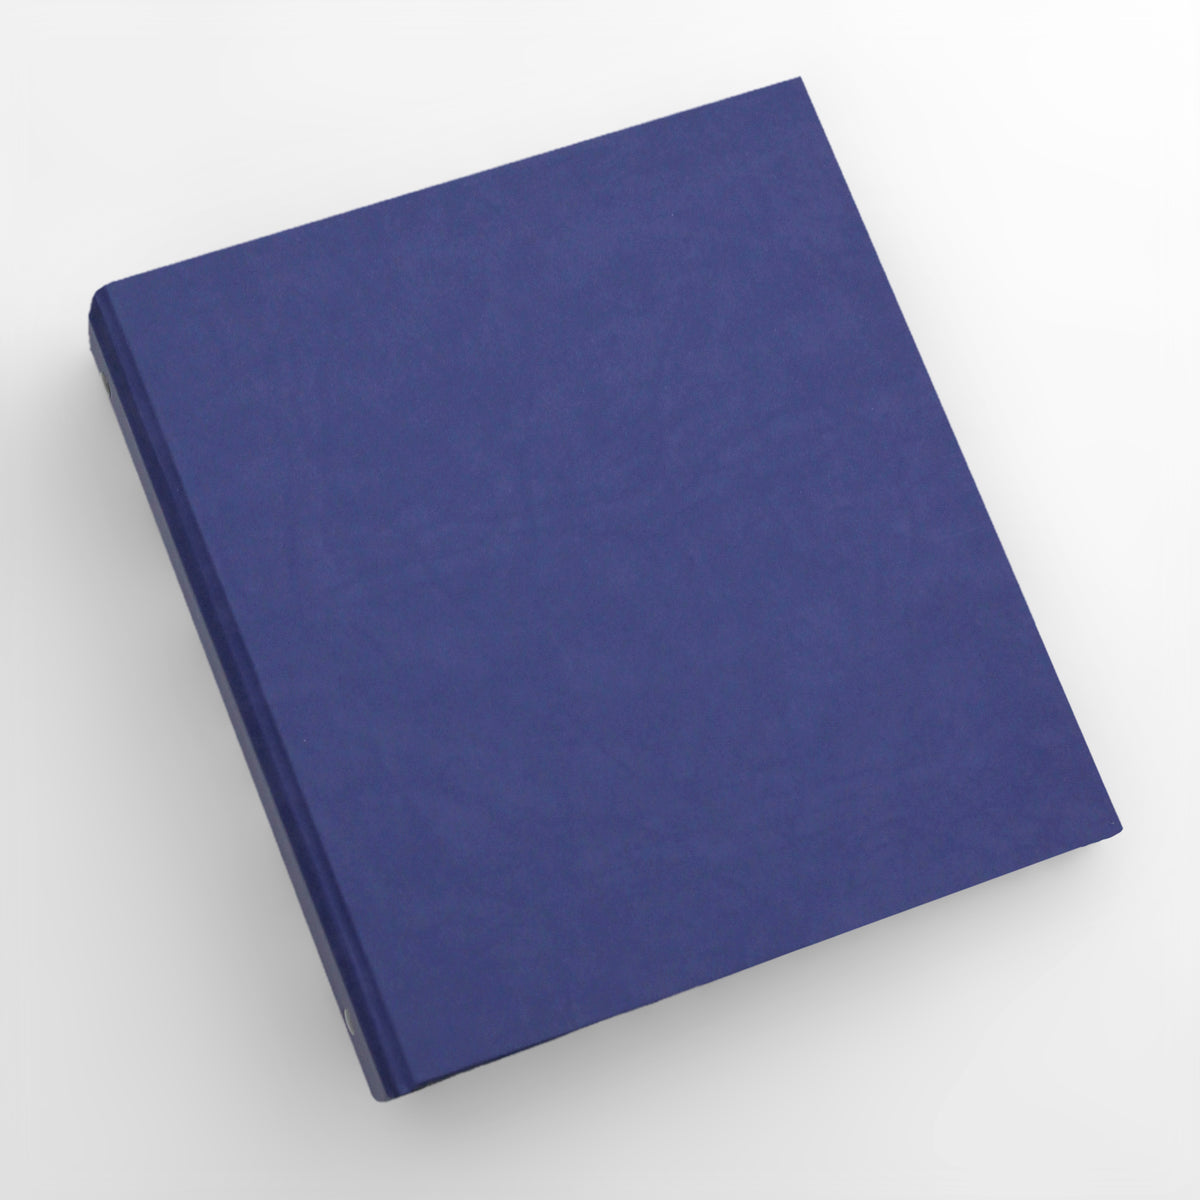 Storage Binder for Photos or Documents with Indigo Vegan Leather Cover